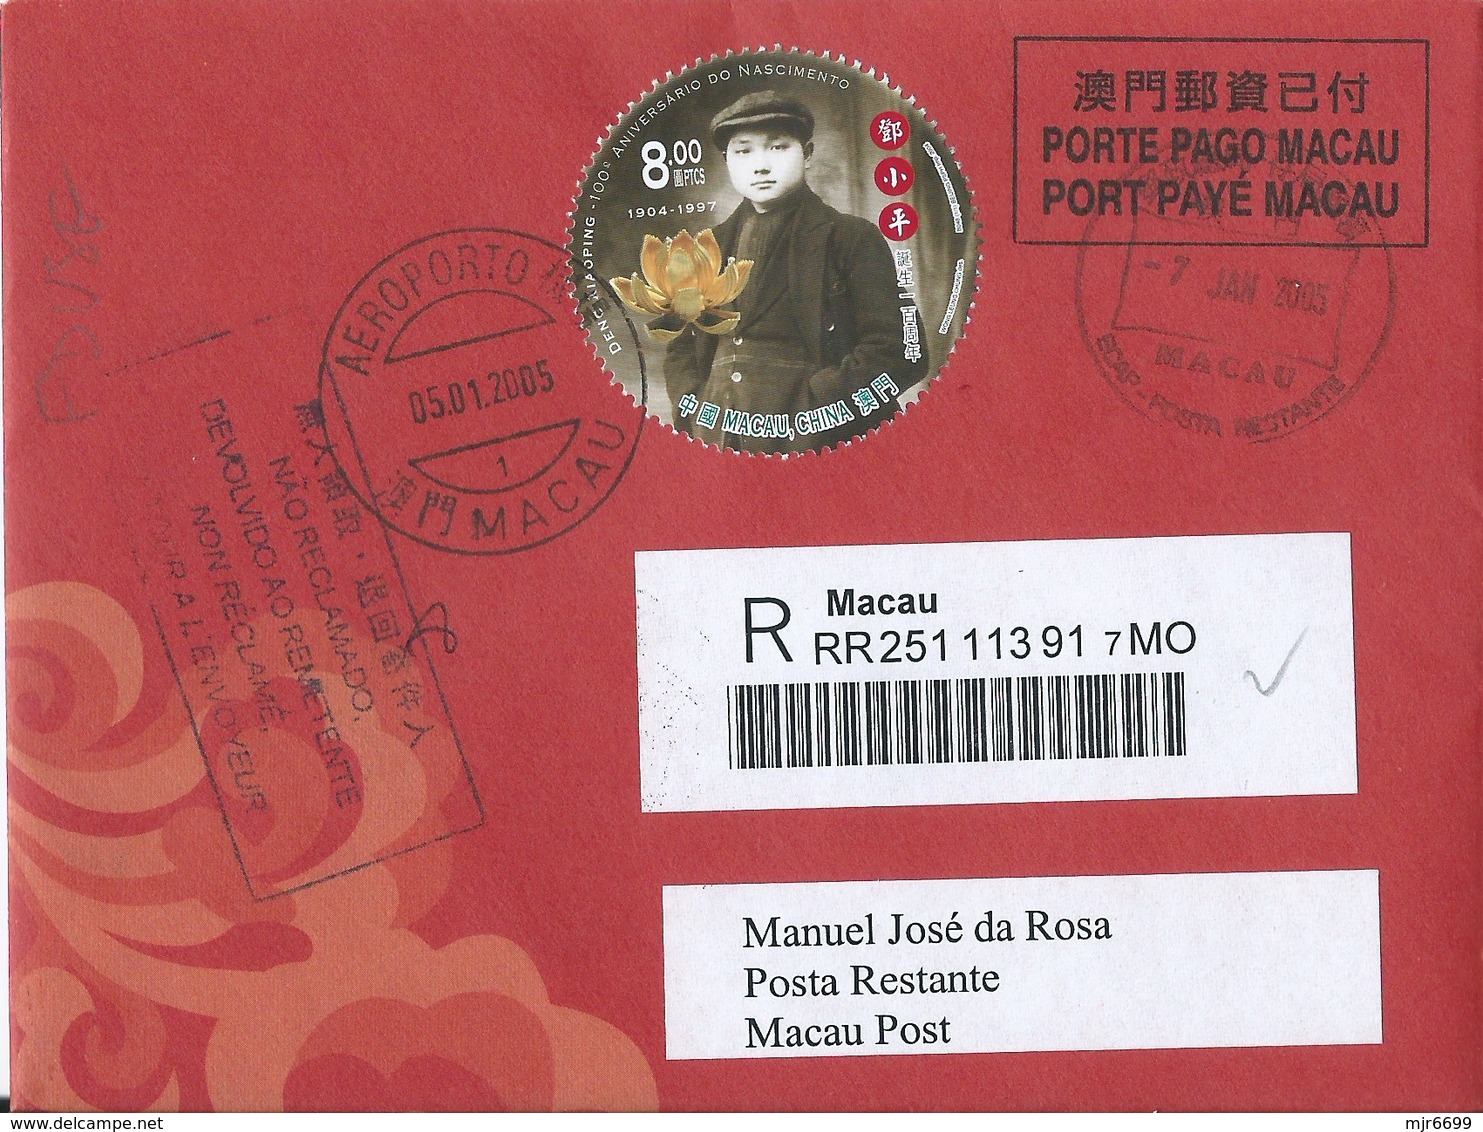 MACAU 2005 LUNAR NEW YEAR OF THE COCK GREETING CARD & POSTAGE PAID REG COVER 1ST DAY LOCAL USAGE - Interi Postali